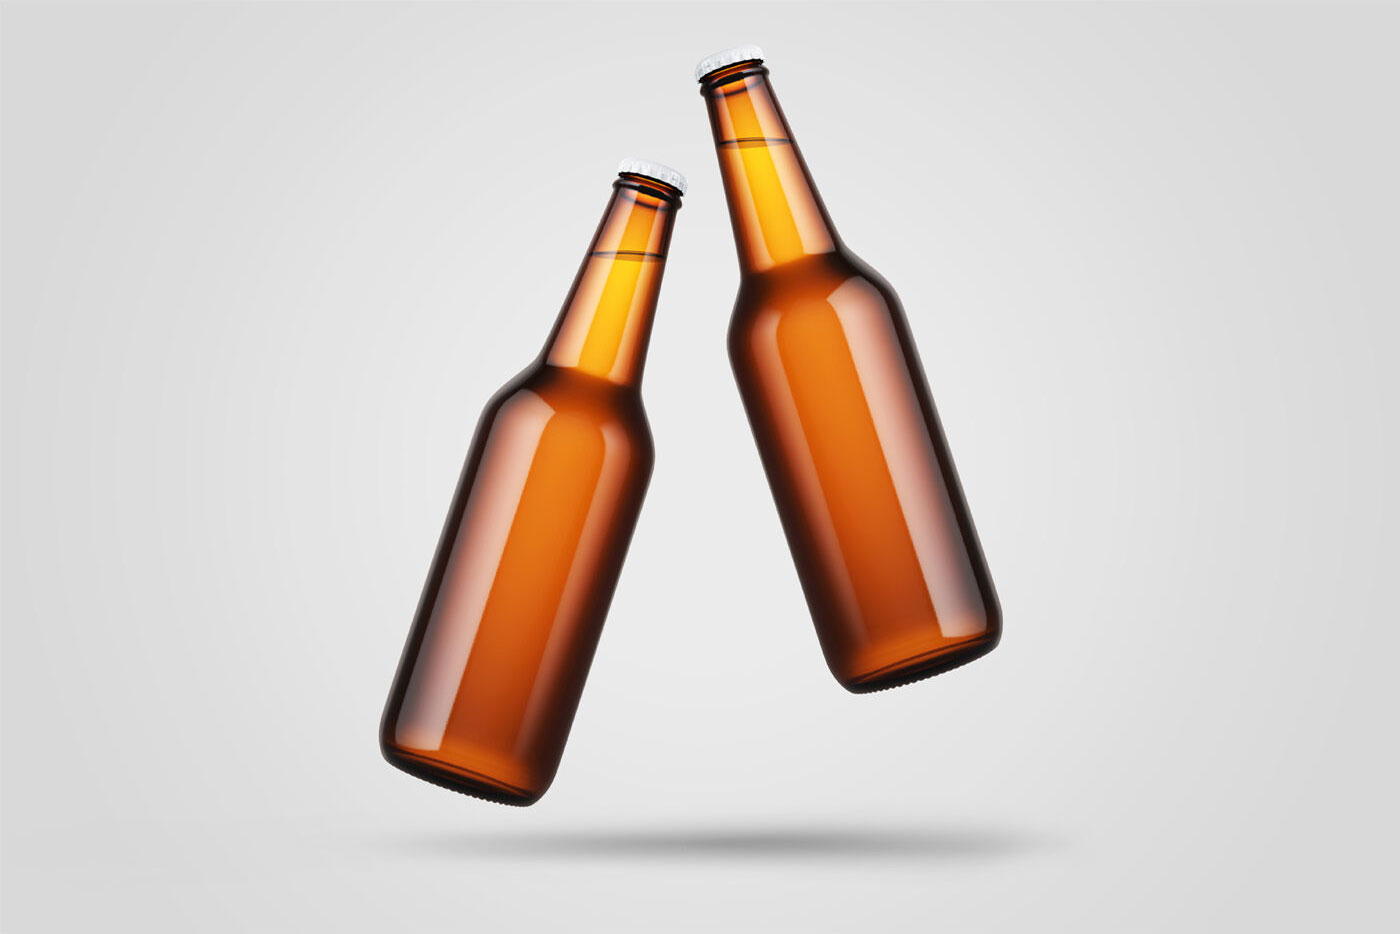 A Pair of Classic Levitating Beer Bottle Mockup FREE PSD